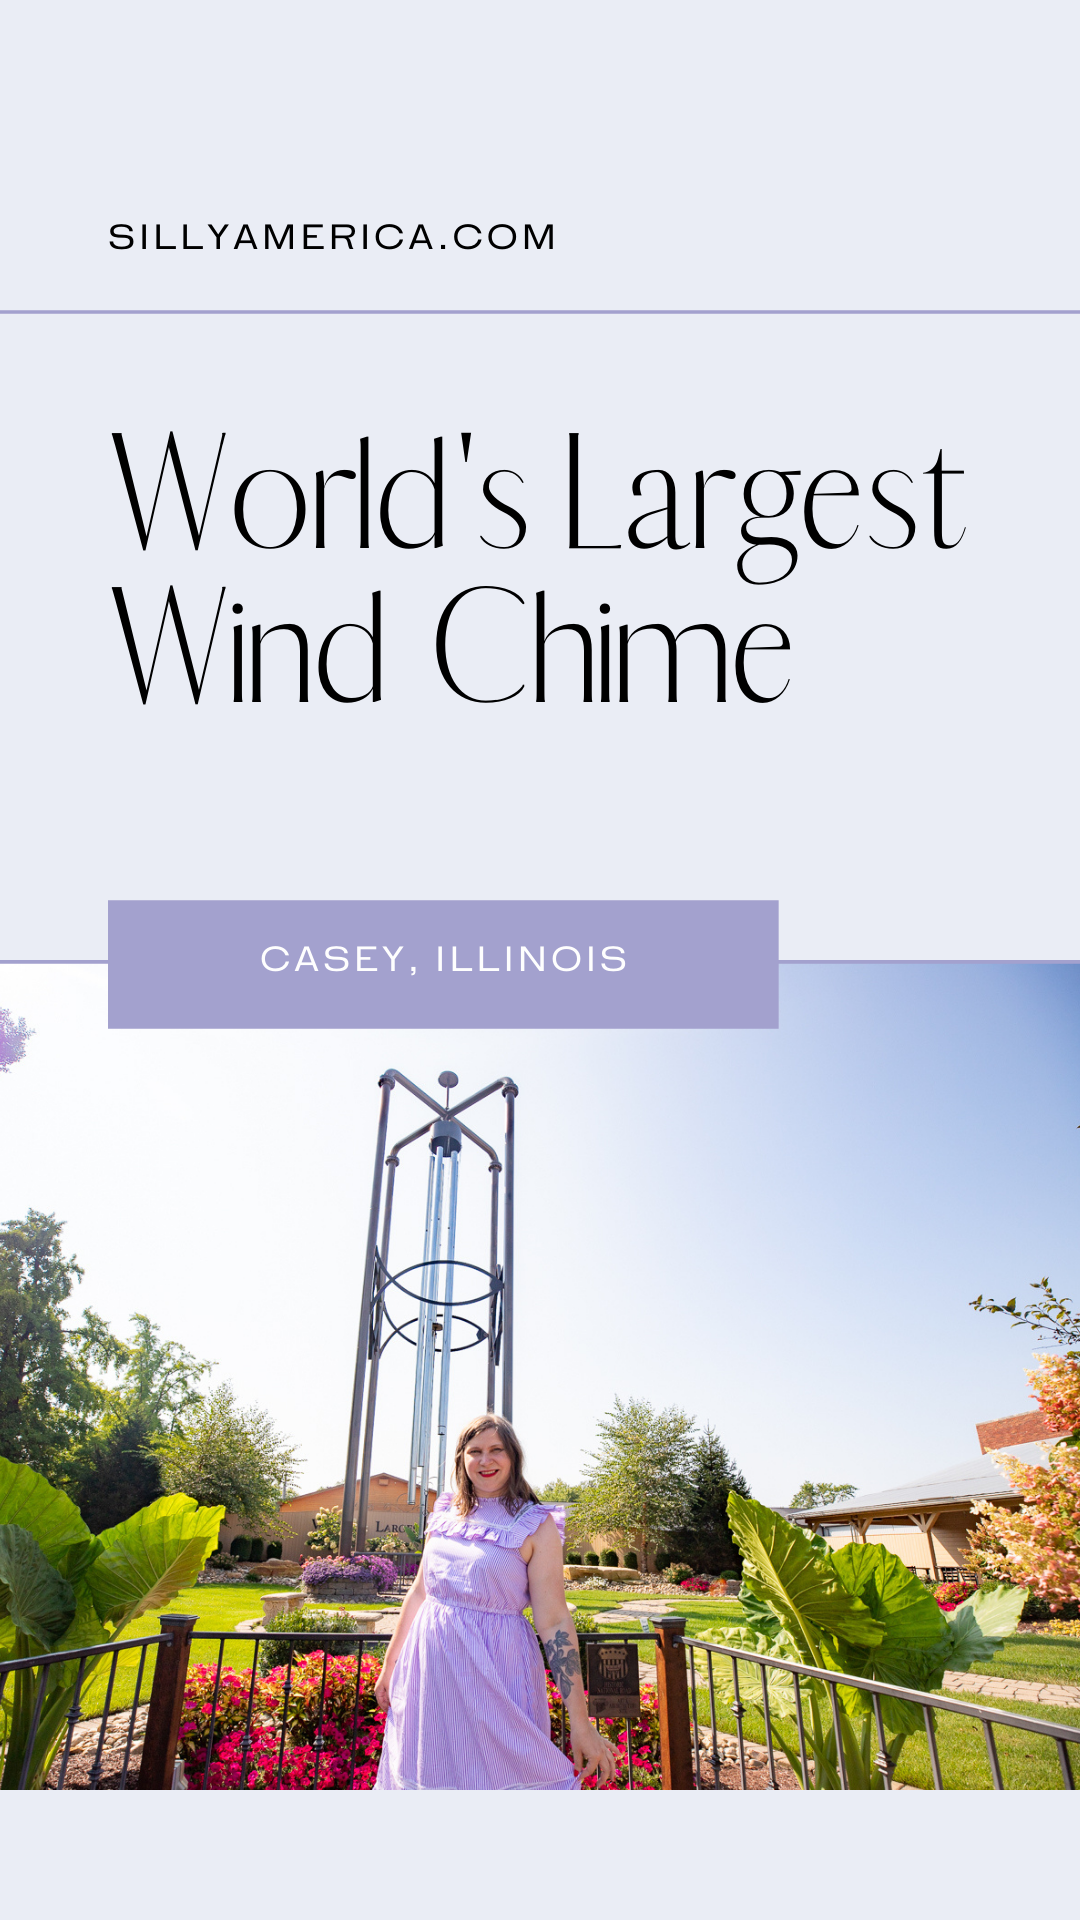 Casey, Illinois is a small town known for its big things. But it wasn’t always that way. Casey used to be just a small town with normal sized things. That is, until Jim Bolin got involved. It all started with one idea and the first big thing in Casey was the World’s Largest Wind Chime. Visit on your Illinois road trip or weekend getaway.  #IllinoisRoadsideAttractions #IllinoisRoadsideAttraction #RoadsideAttractions #RoadsideAttraction #RoadTrip #IllinoisRoadTrip #IllinoisWeekendGetaways